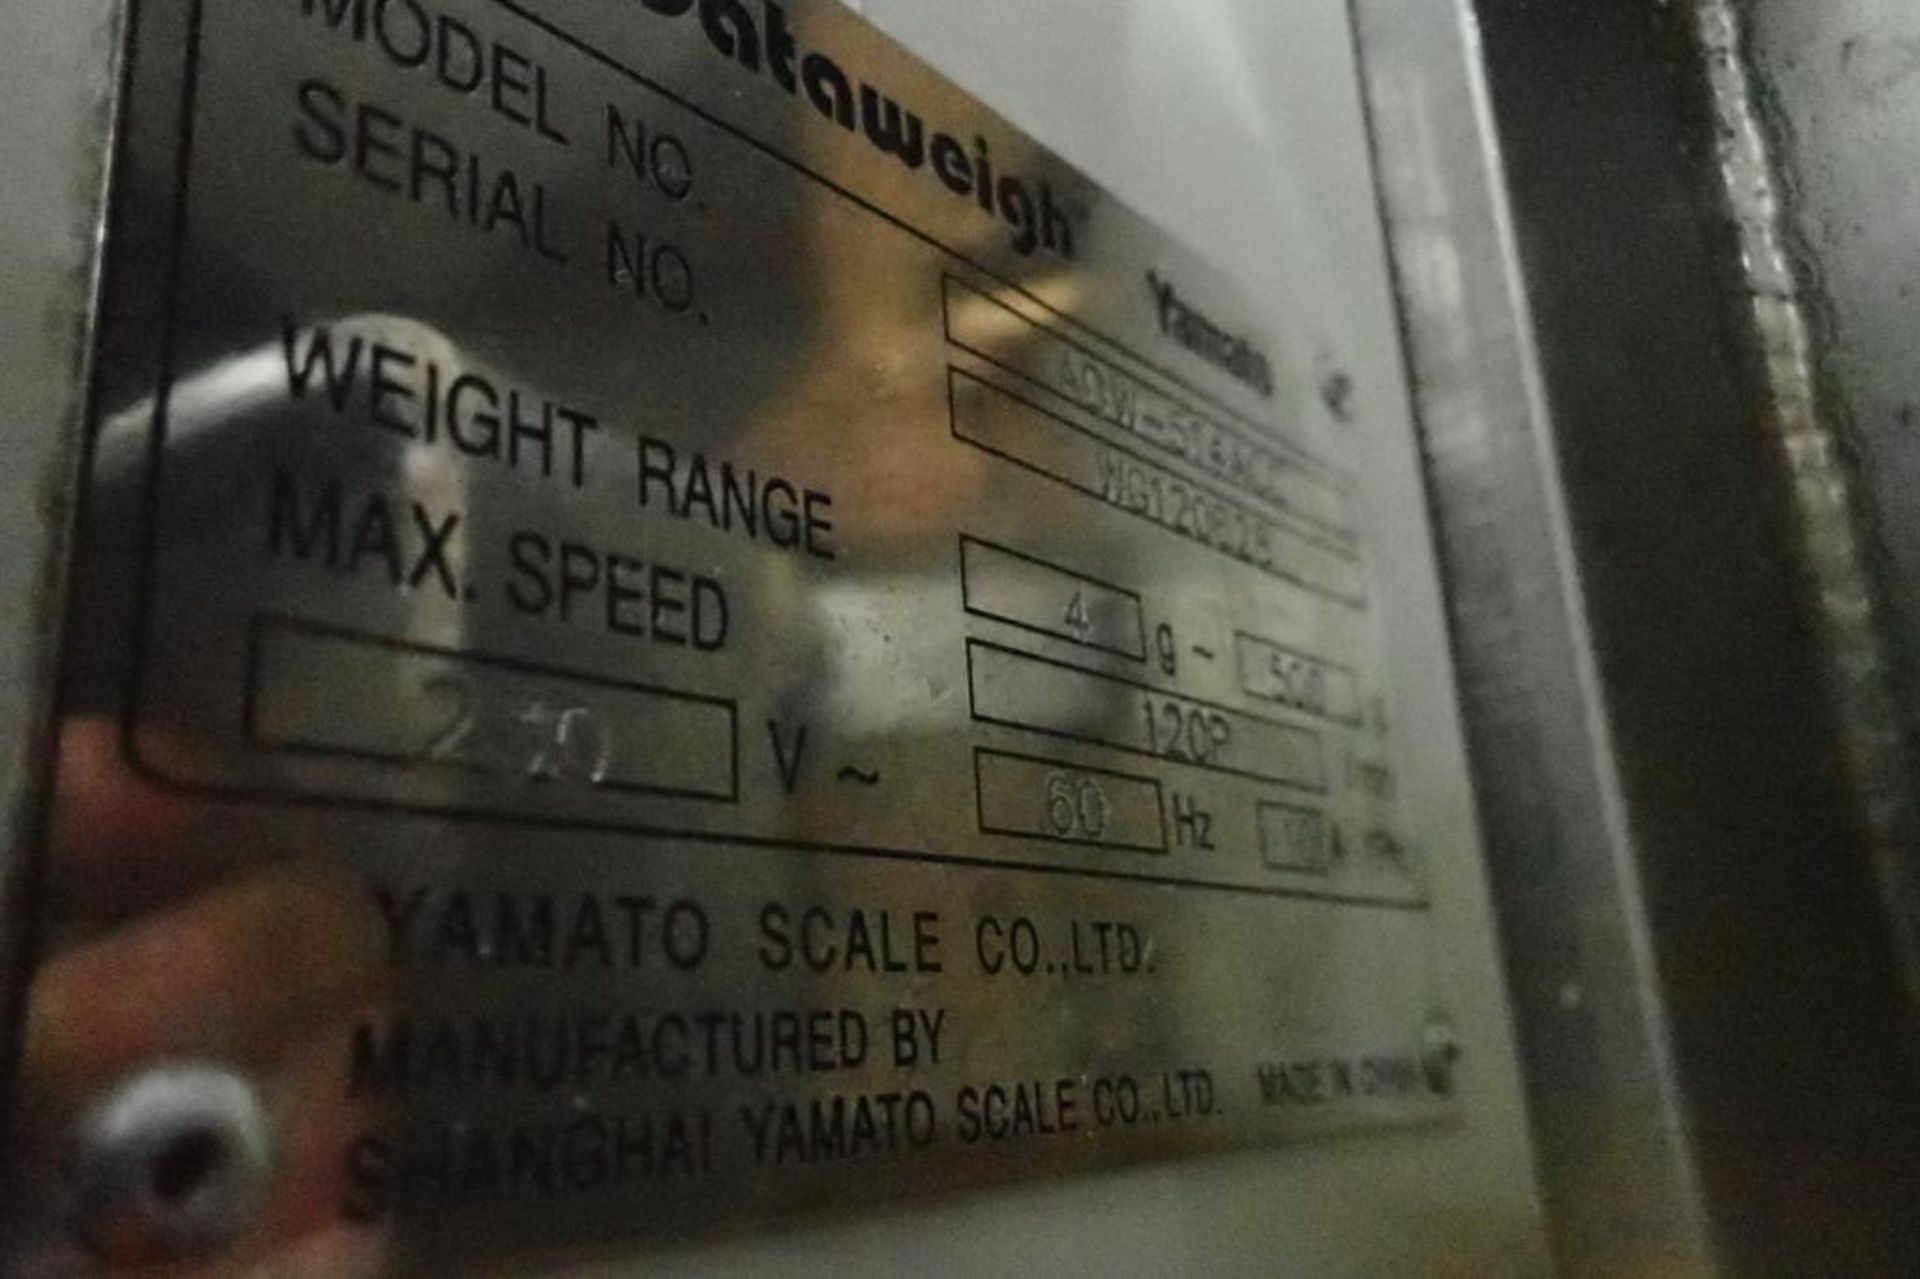 Yamato 14-head scale, Model ADW-514ACC, SN WG120628, range 4 g to 500 g, touch screen control. **Rig - Image 8 of 10